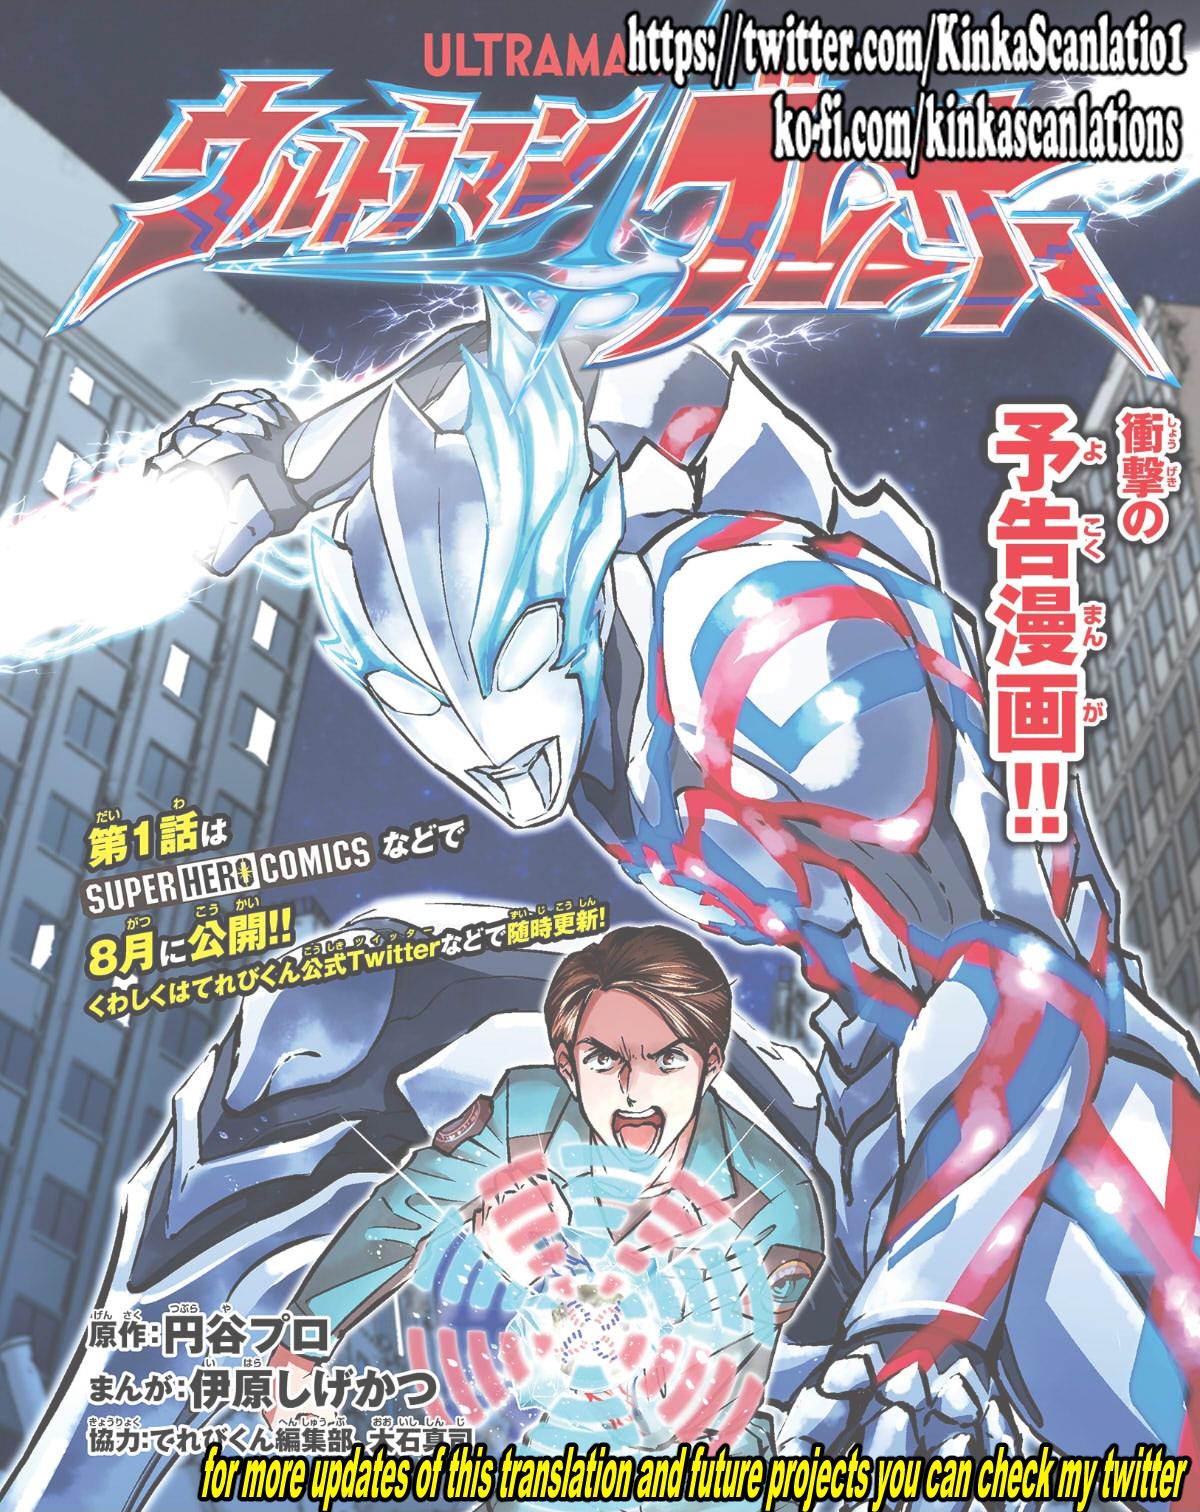 Ultraman Blazar Vol.0 Chapter 0: Manga Preview - Picture 2